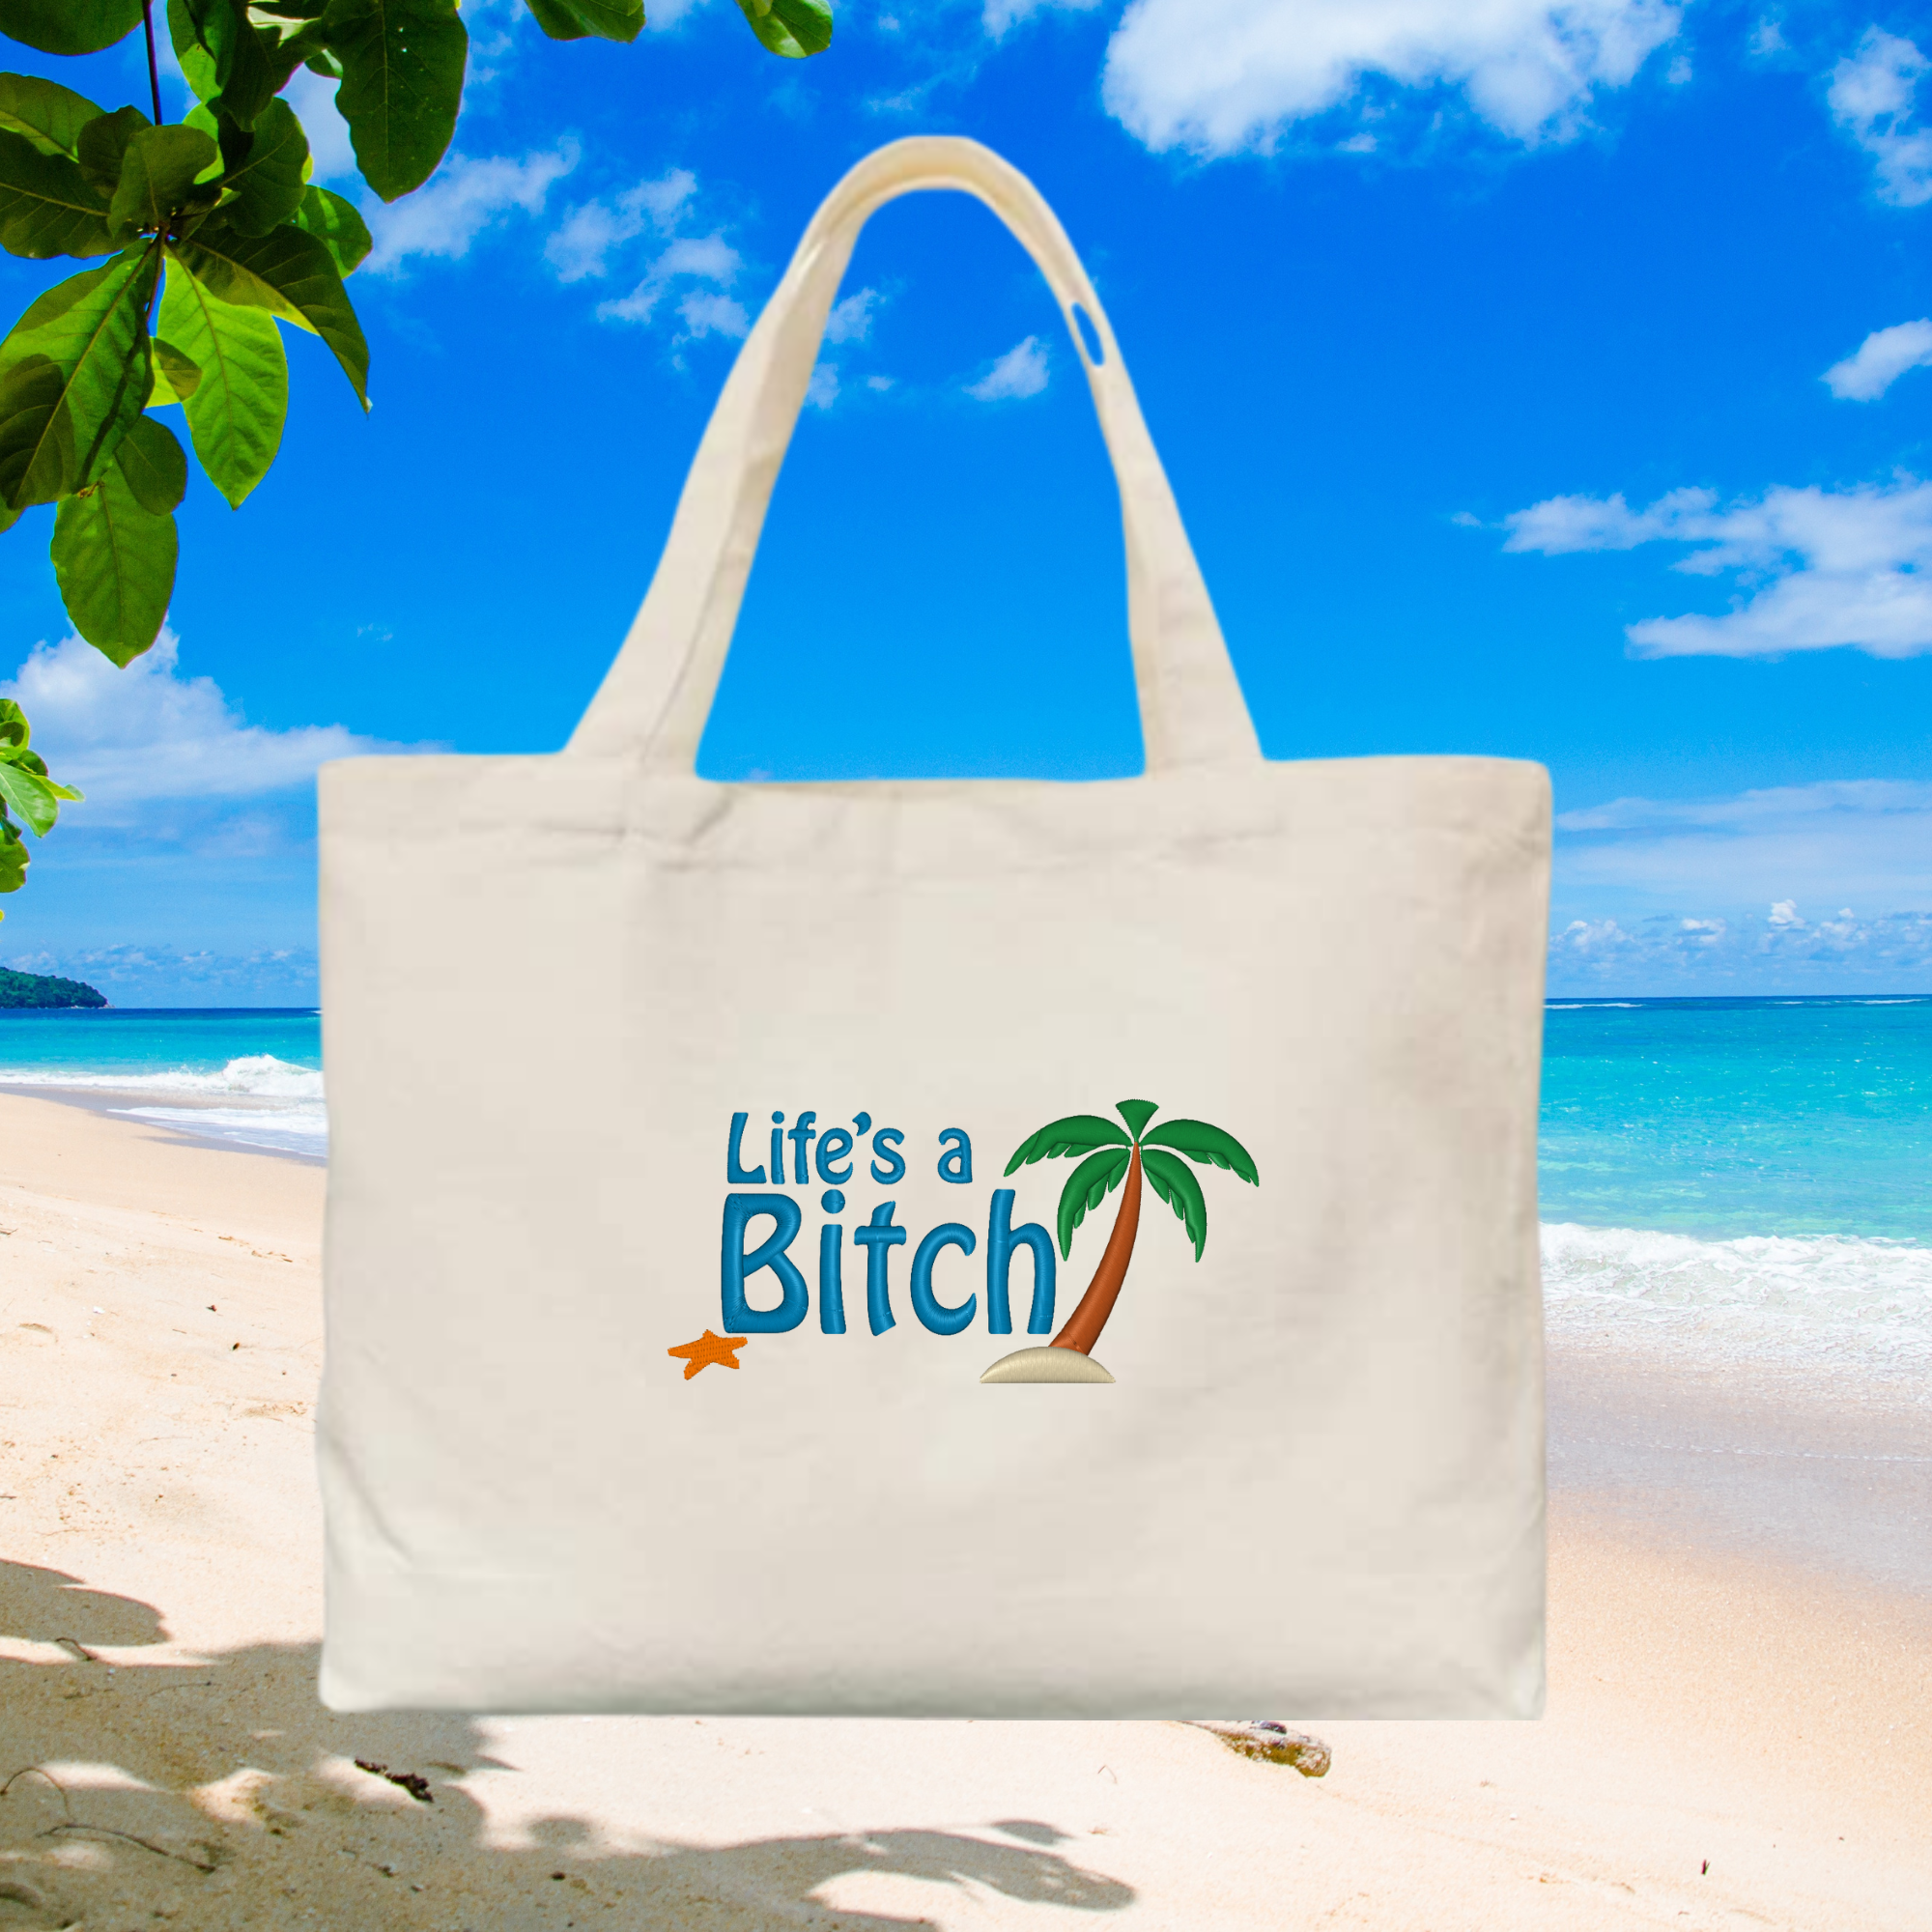 Life's a Bitch Palm Tree Embroidered Canvas Tote Bag